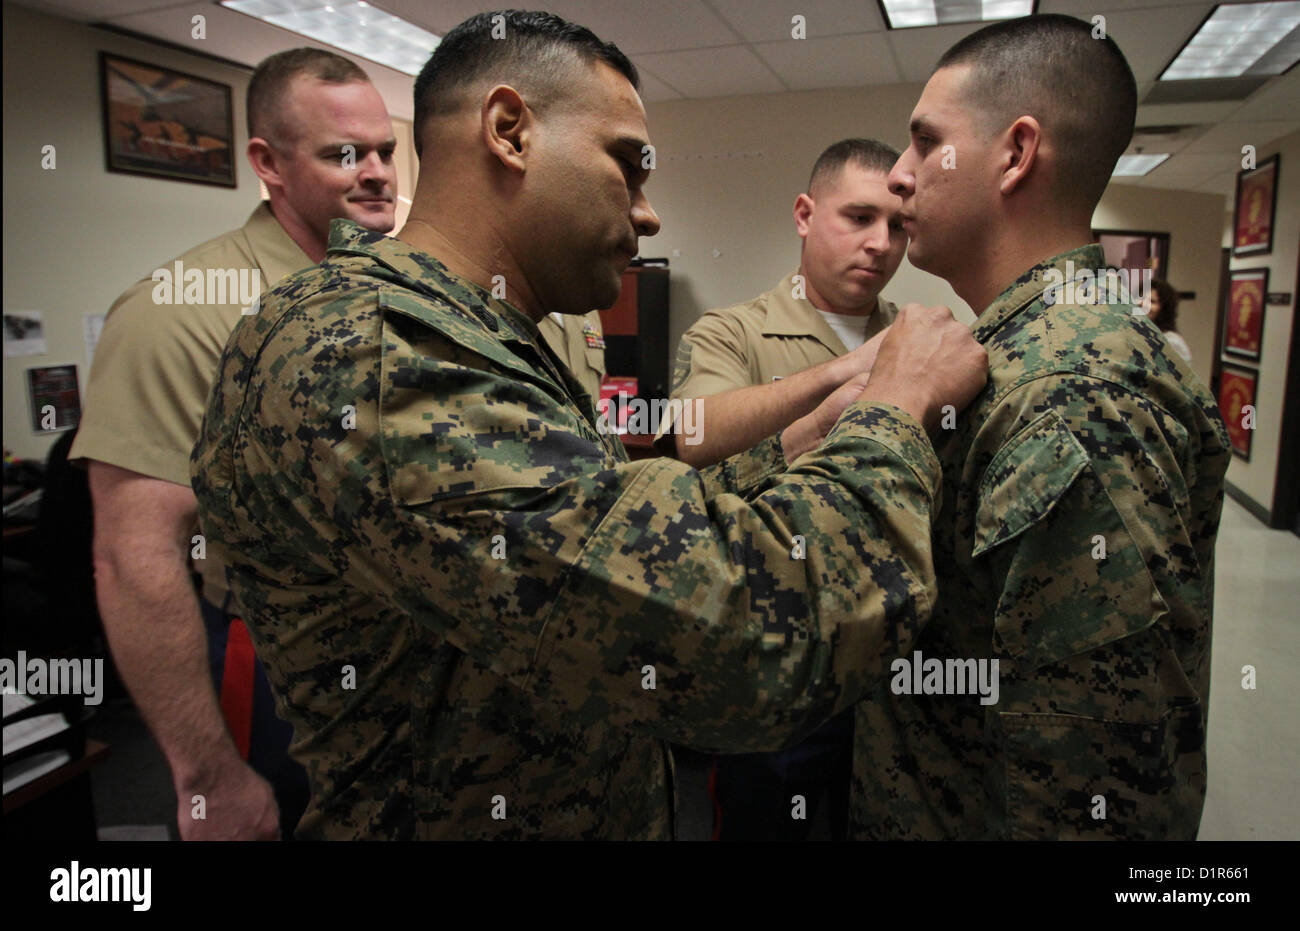 Staff Sgt. Hector E. Orozco, receives new staff sergeant chevrons on his collar upon being meritoriously promoted from sergeant to staff sergeant during a ceremony at the Marine Corps Recruiting Station Phoenix Headquarters in Phoenix, Jan. 2, 2013. Orozco, a native of Los Angeles, and an aircraft electronic countermeasures systems technician by trade, has been a recruiter in the Phoenix region since July, 2011. 'To get promoted is one thing. Everybody out here on recruiting duty is hand selected and personally screened, so you're already dealing with an A-List group of people to begin with,'  Stock Photo